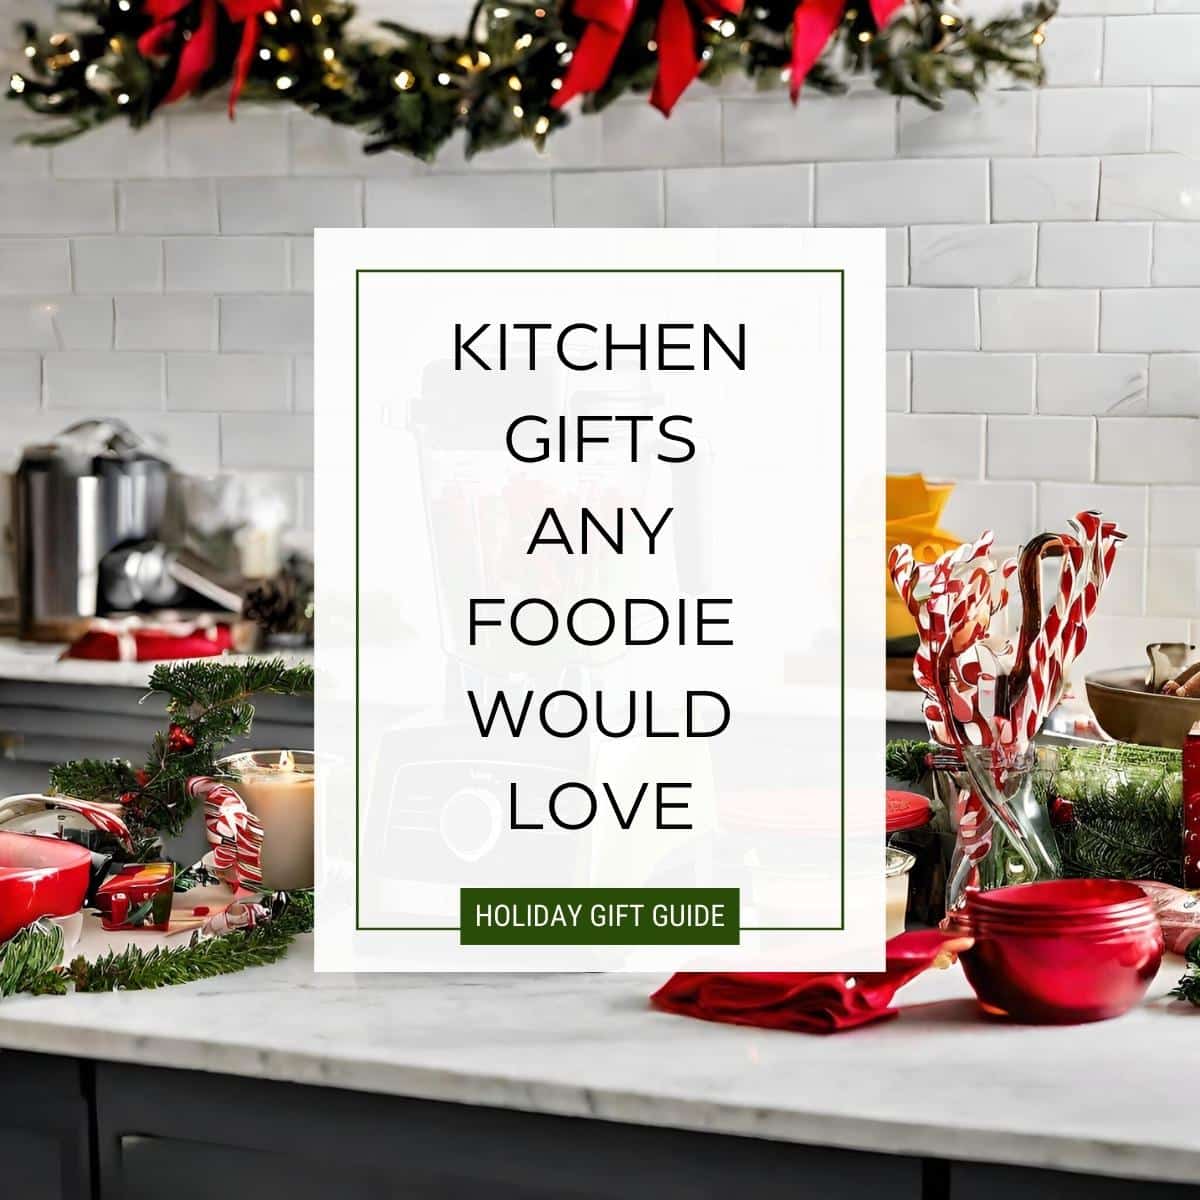 Gifts for people that like to cook • Oh Snap! Let's Eat!